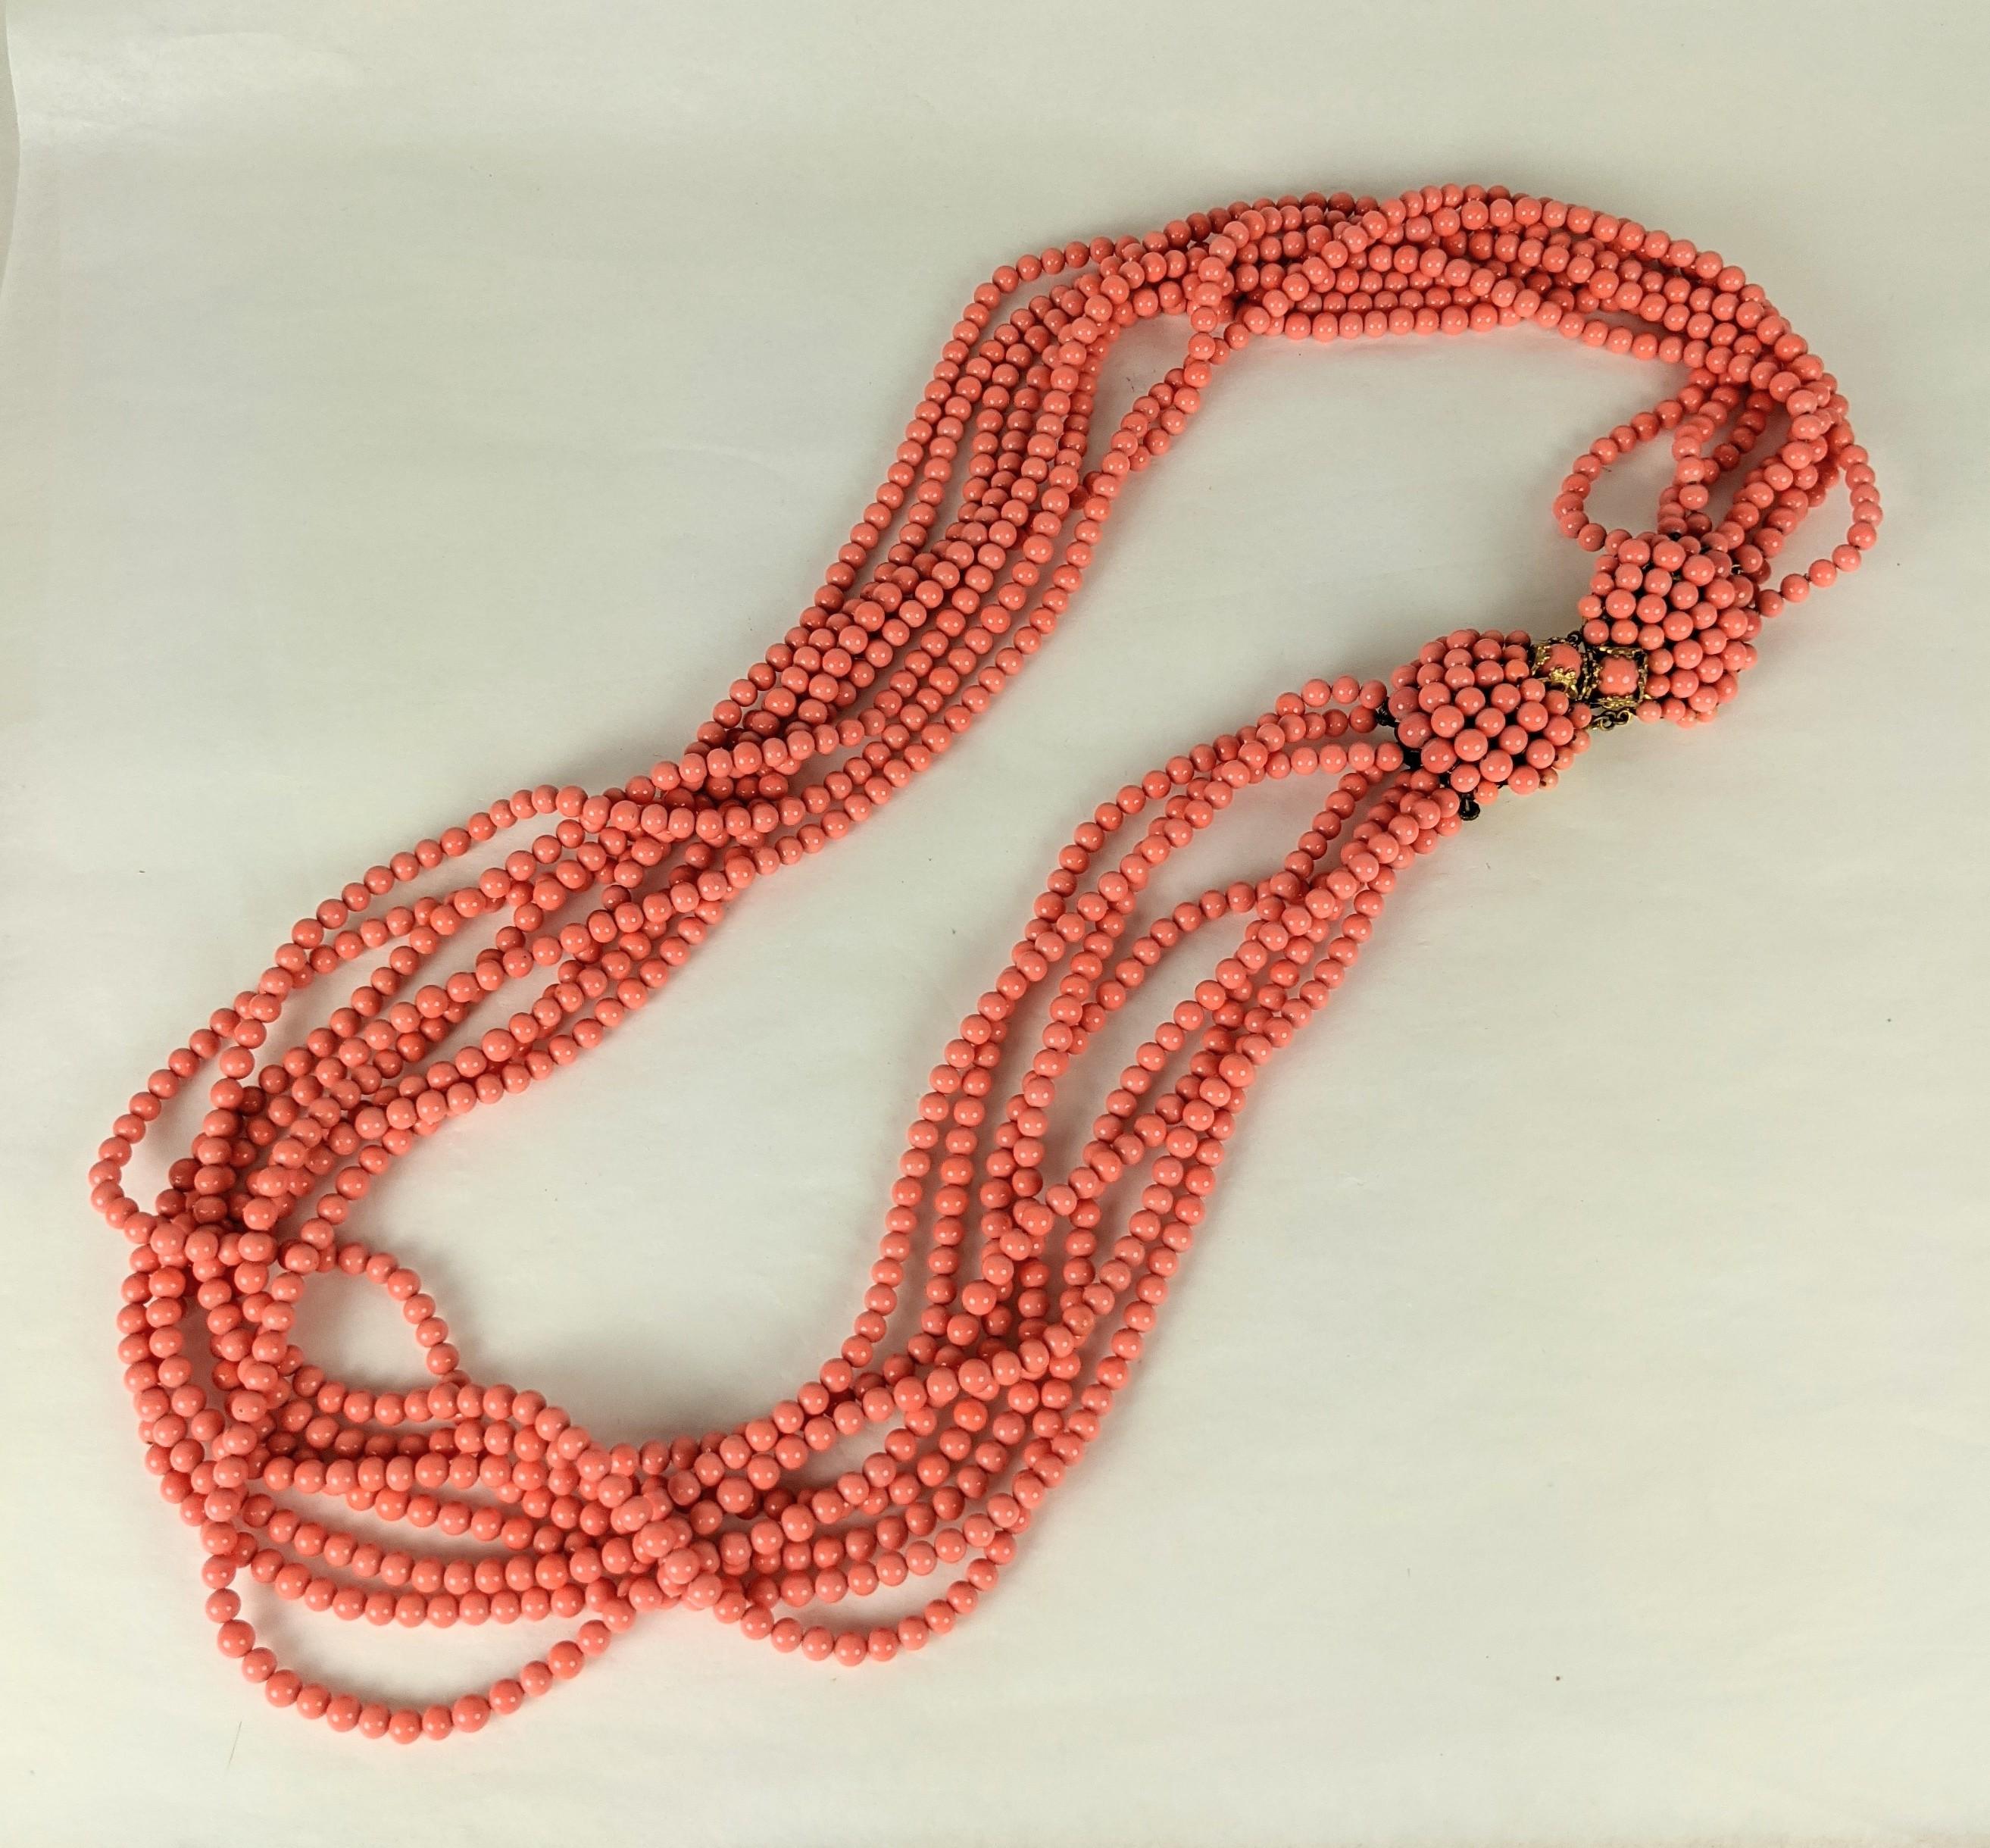 Christian Dior faux coral pate de verre long torsade necklace. Consisting of eight strands of the pale orange coral glass beads with double clasp of hand sewn scallop shaped shell motifs in gilt bronze.
Excellent Condition, Marked France. Unsigned